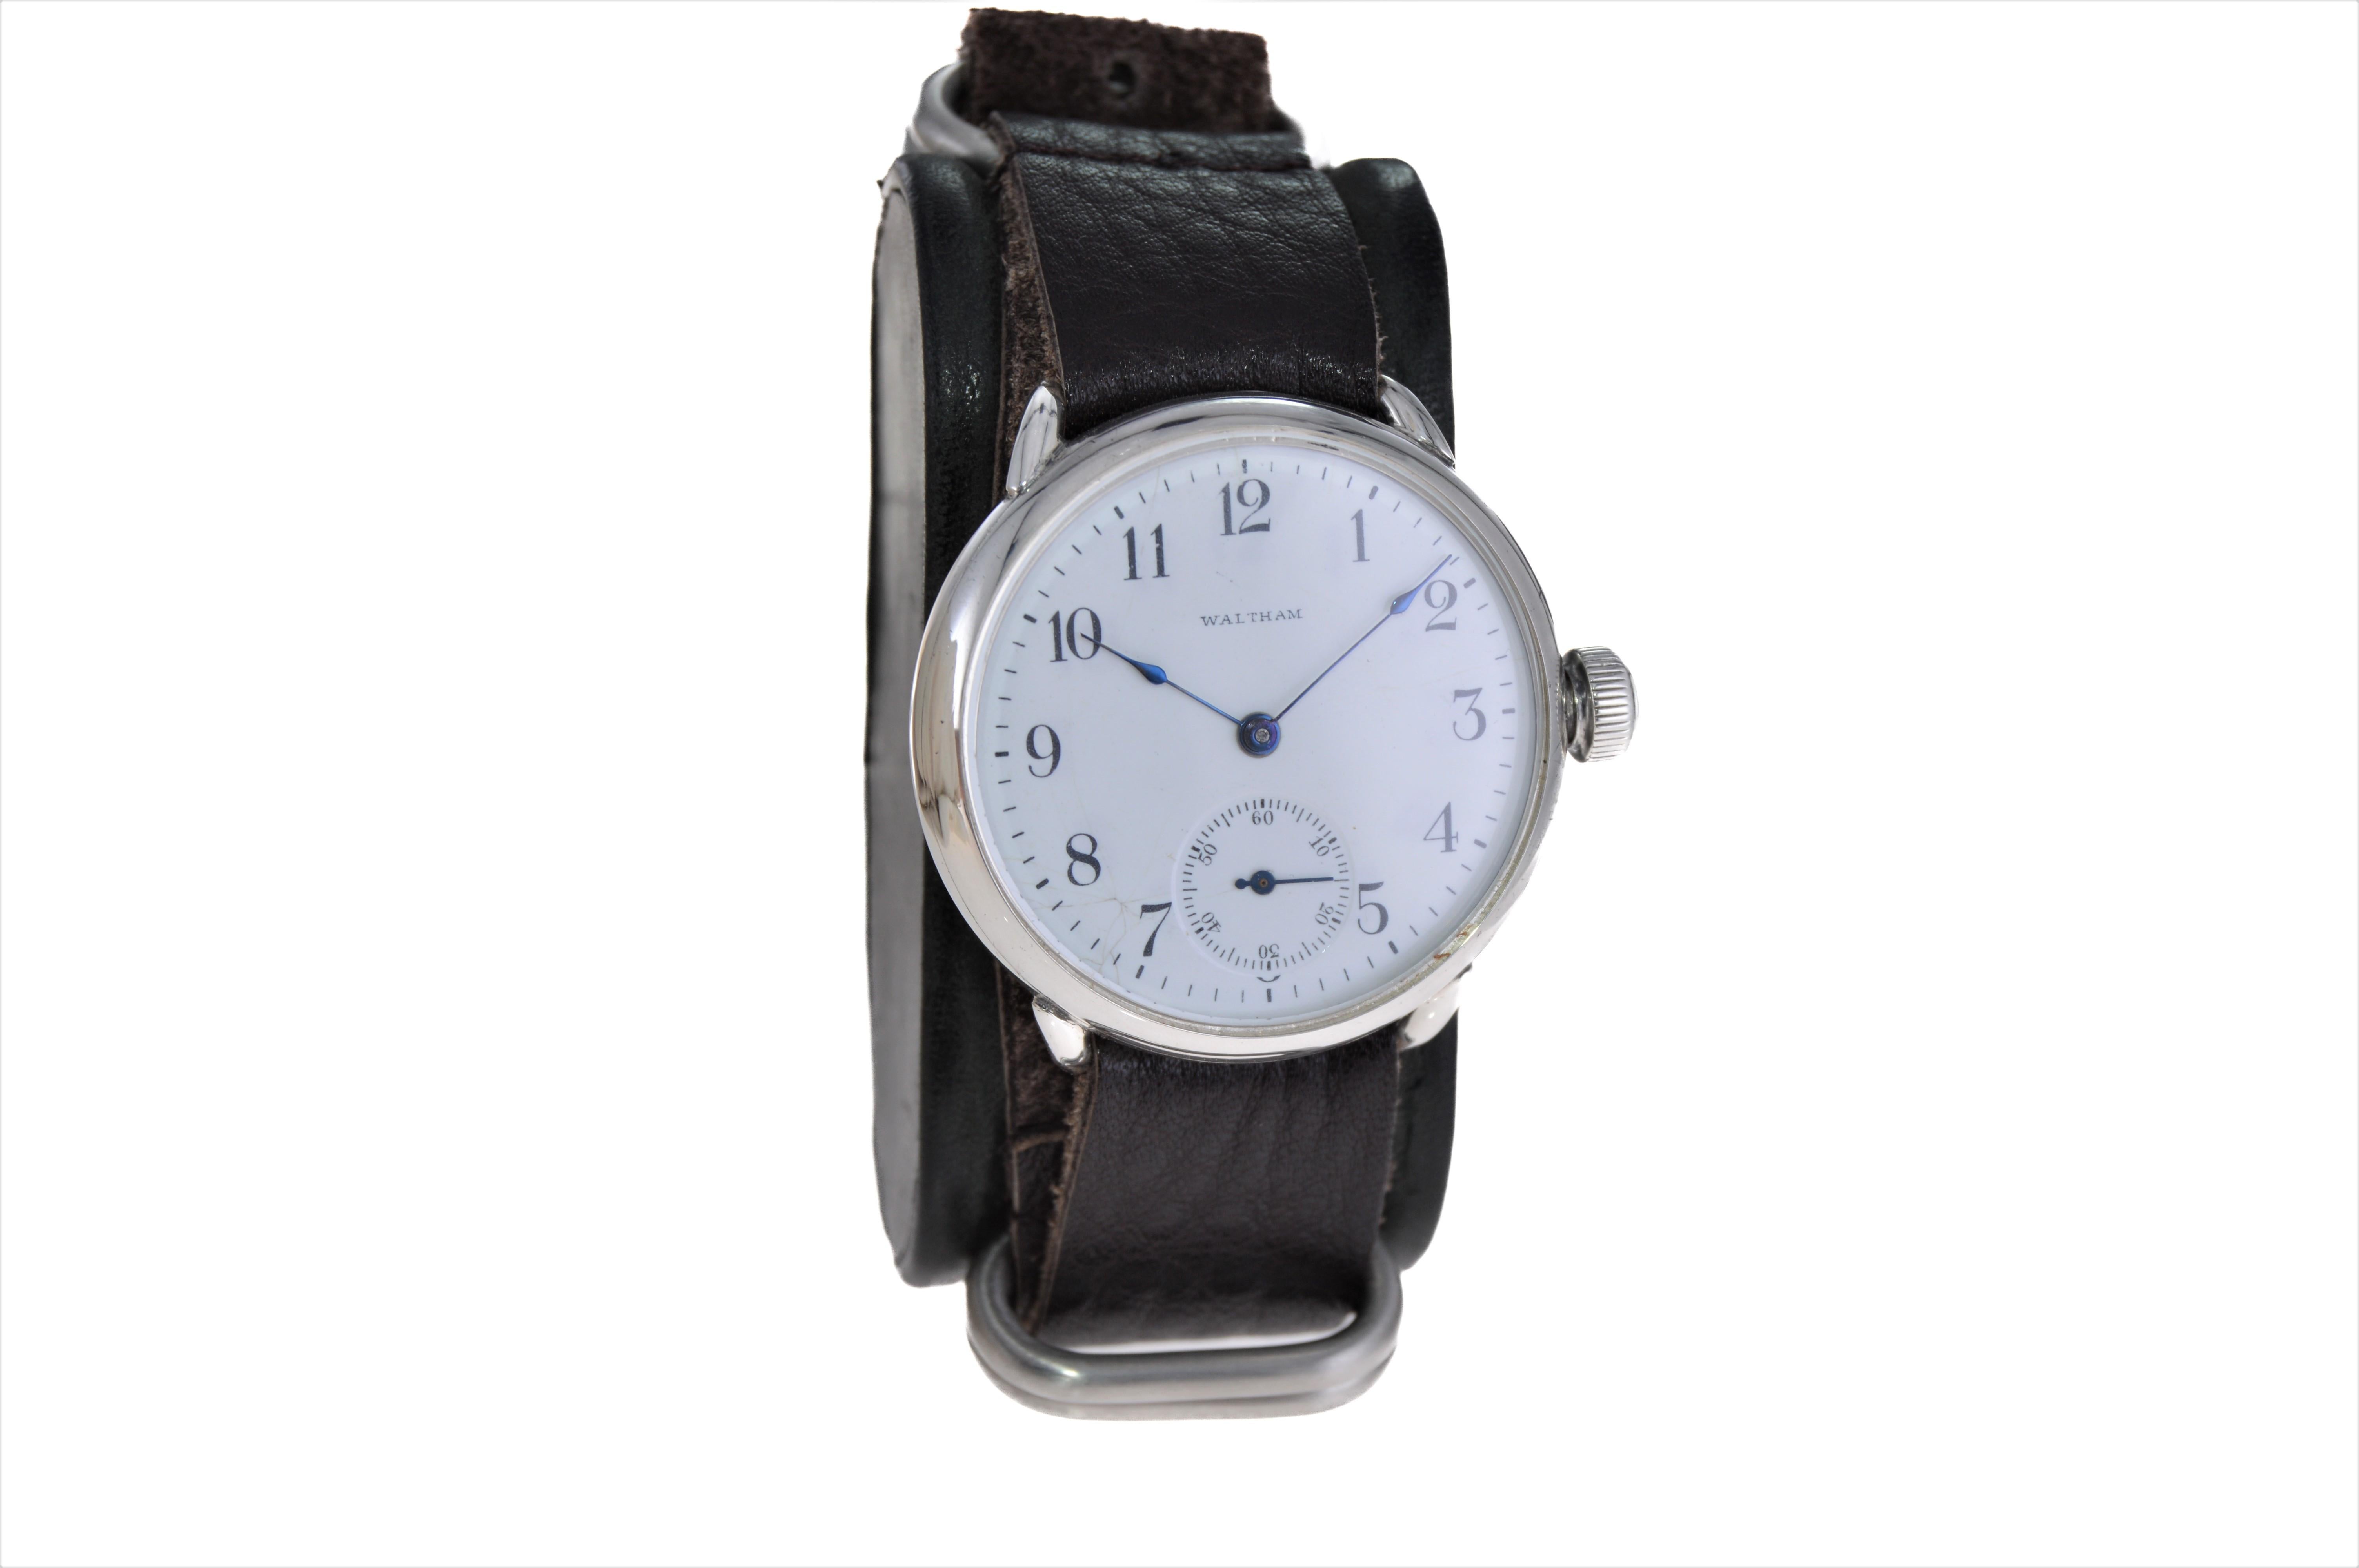 FACTORY / HOUSE: American Waltham Watch Company
STYLE / REFERENCE: Campaign Style / Trench Watch
METAL / MATERIAL: Sterling Silver
CIRCA / YEAR: 1901
DIMENSIONS / SIZE: 41mm Length X 38mm Diameter
MOVEMENT / CALIBER: Manual Winding / 15 Jewels /